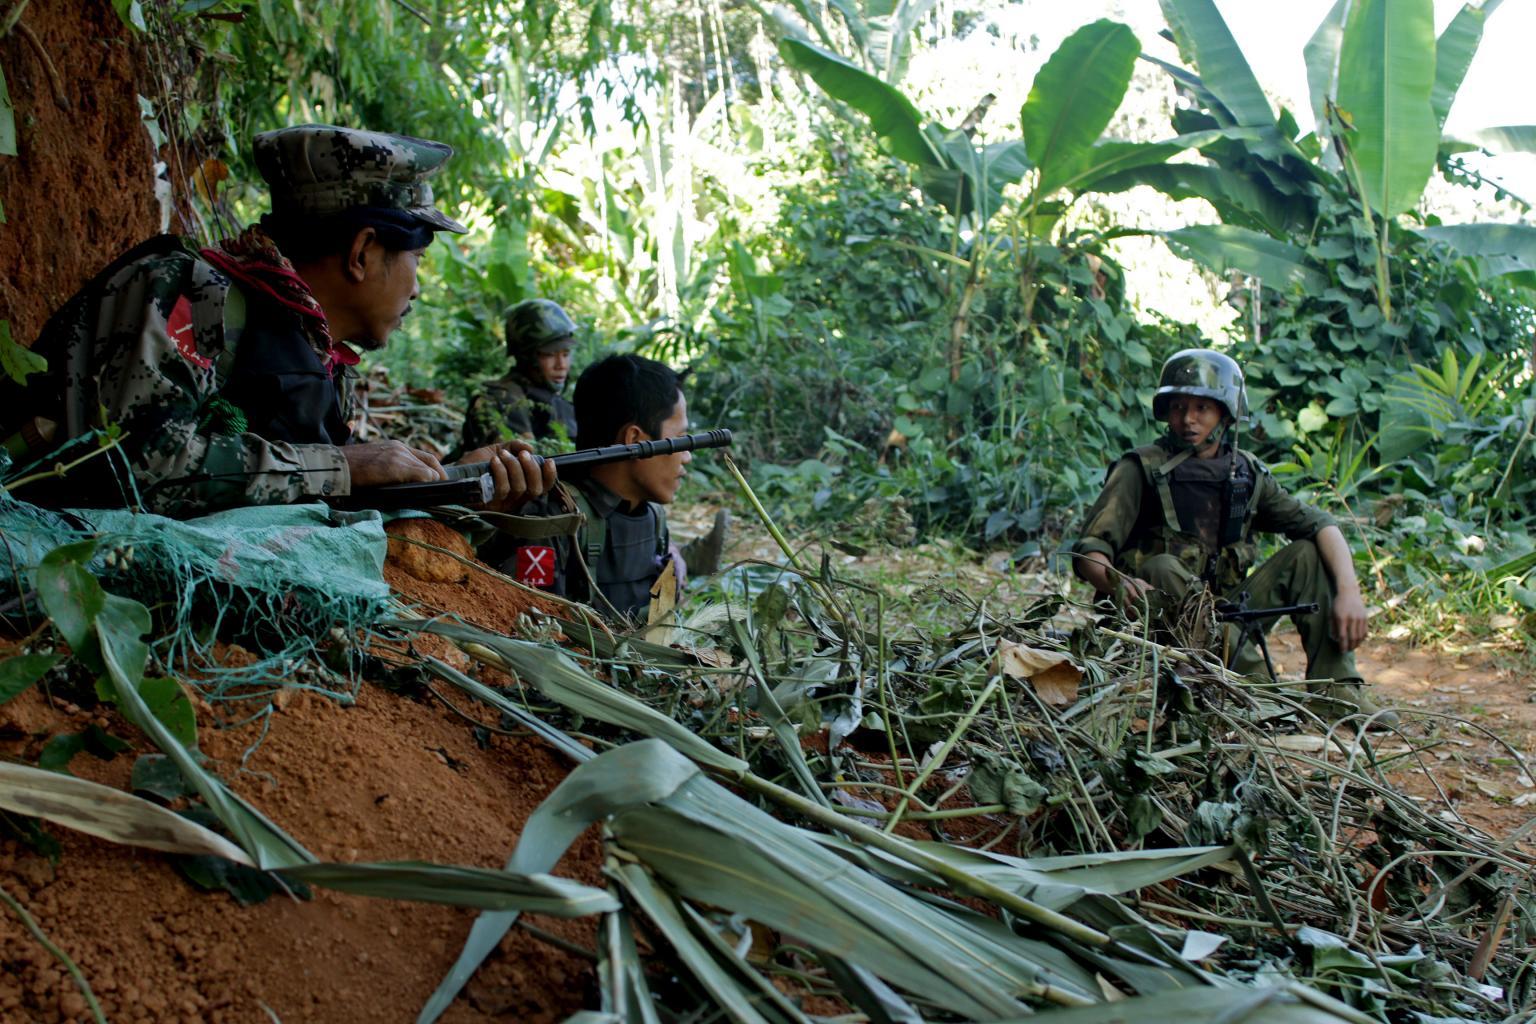 Rebel Kachin Independence Army (KIA) 3rd Brigade soldiers secure an area on Hka Ya mountain in Kachin province on Jan. 20, 2013. Kachin ethnic minority rebels in war-torn northern Myanmar accused the military of launching a fresh attack on that date, just